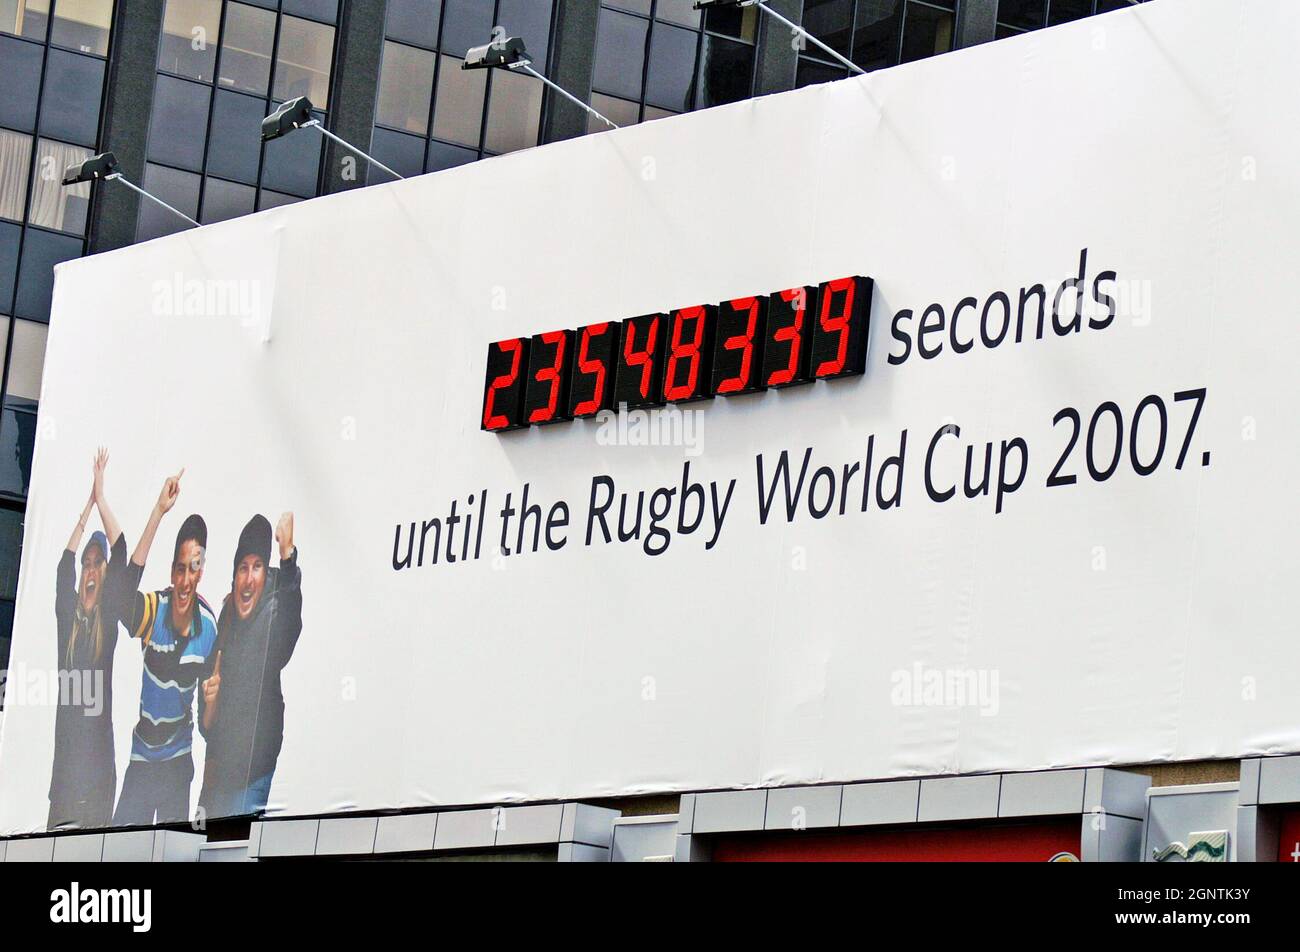 On December 9, 2005, a billboard in Auckland New Zealand has a moving clock counting the seconds until the Ruby World Cup 2007 begins. Rugby is the national sport of New Zealand drawing the largest number of spectators of any sport.  The All Blacks, the New Zealand national rugby team, won the world cup in 1987, 2011 and 2015. Stock Photo